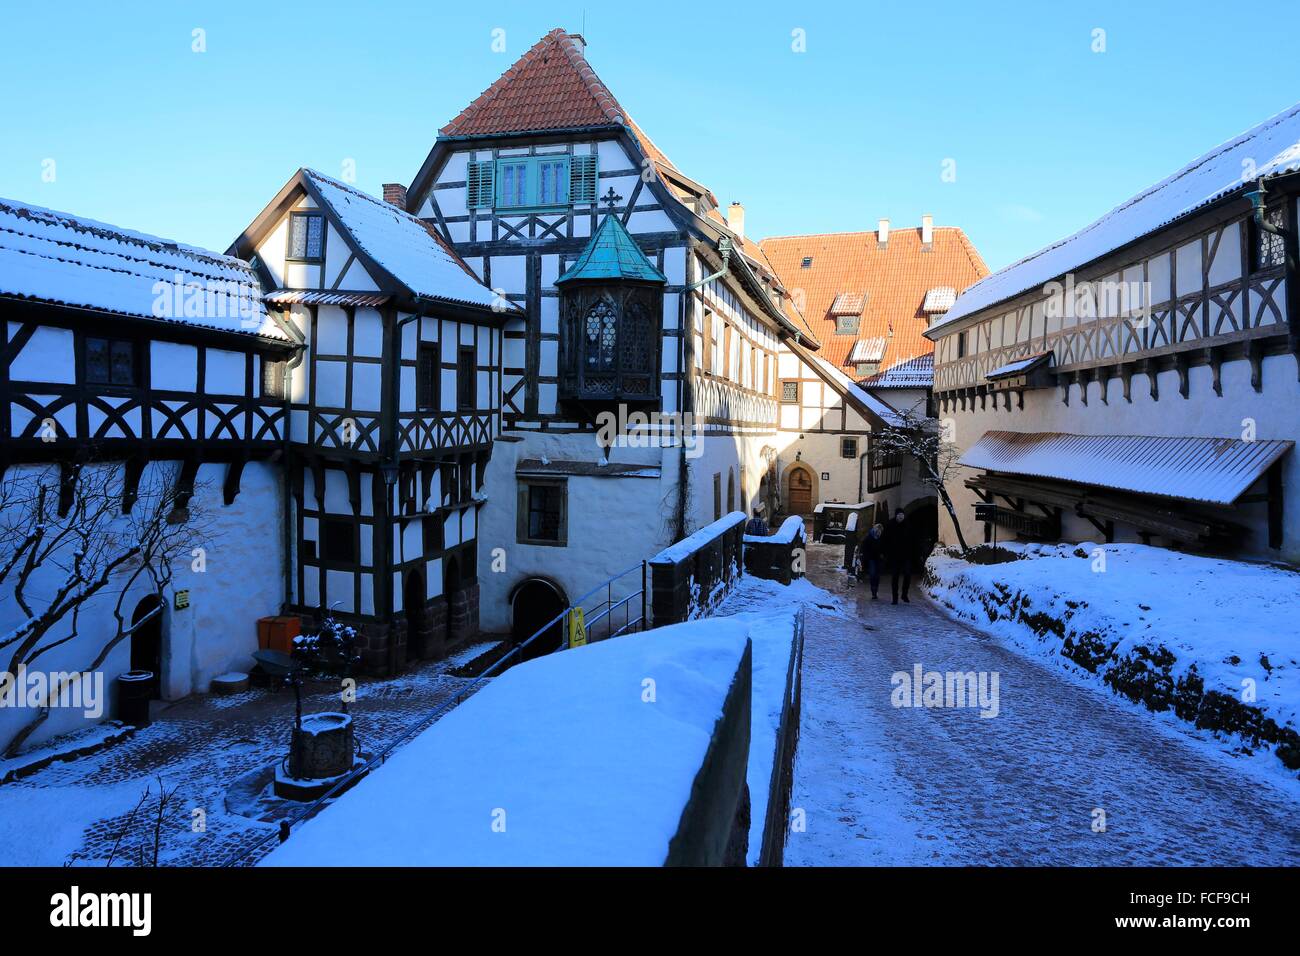 Castle yard of the Wartburg with the Elisabethen passage right. The Wartburg in Eisenach was built around 1067. Now it is a UNESCO World Heritage Site. The Wartburg became famous through the countess Elisabeth and Martin Luther. Date: January 19, 2016 Stock Photo